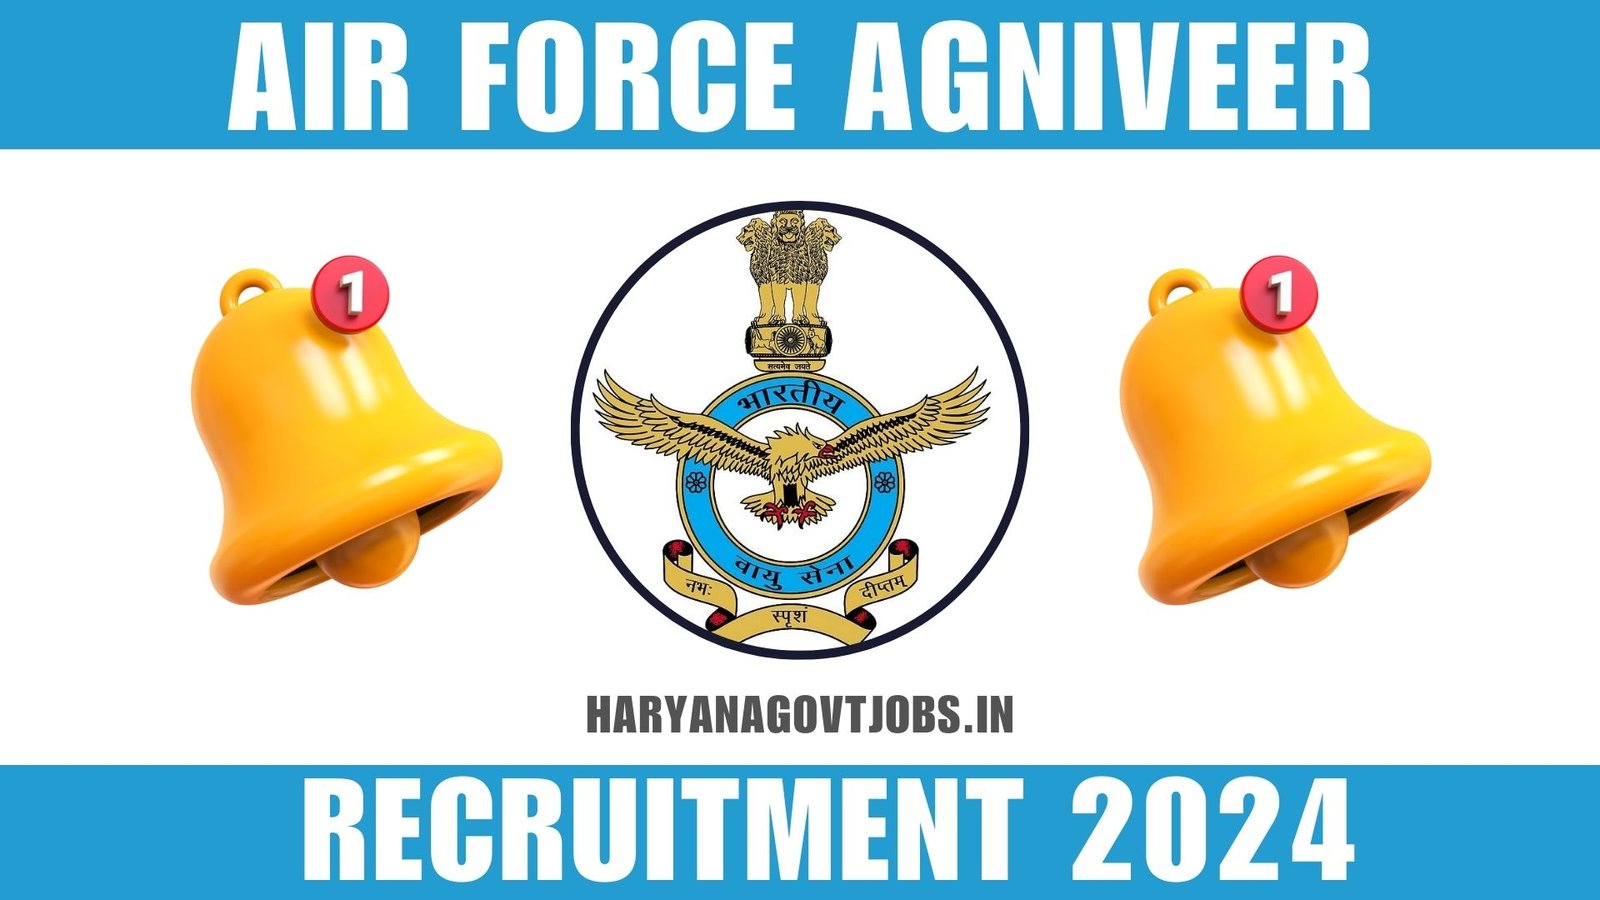 Air Force Agniveer Recruitment 2024 Notification Overview